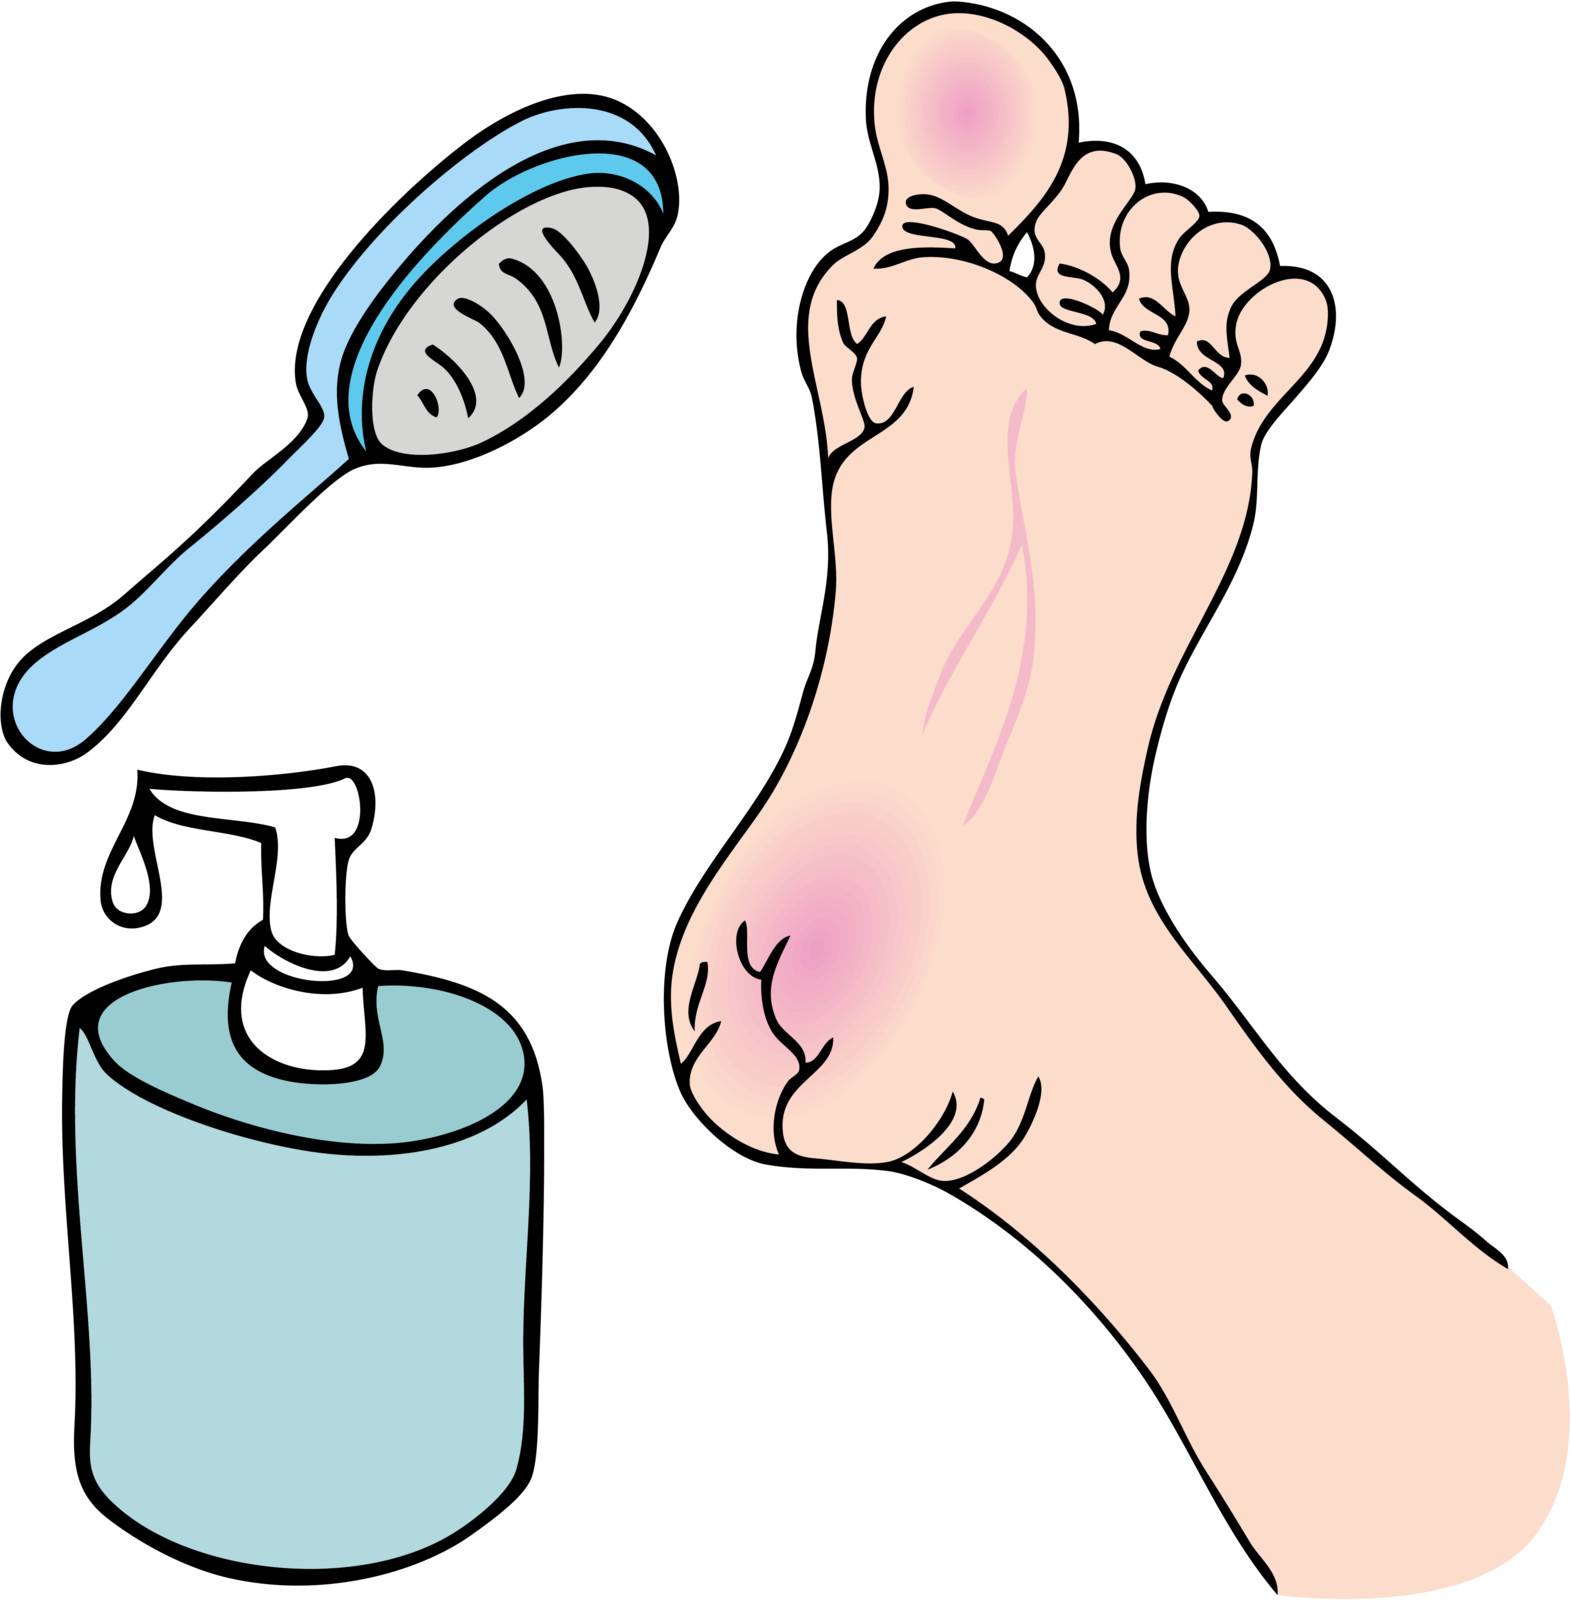 An image of a dry foot with foot spa treatment.